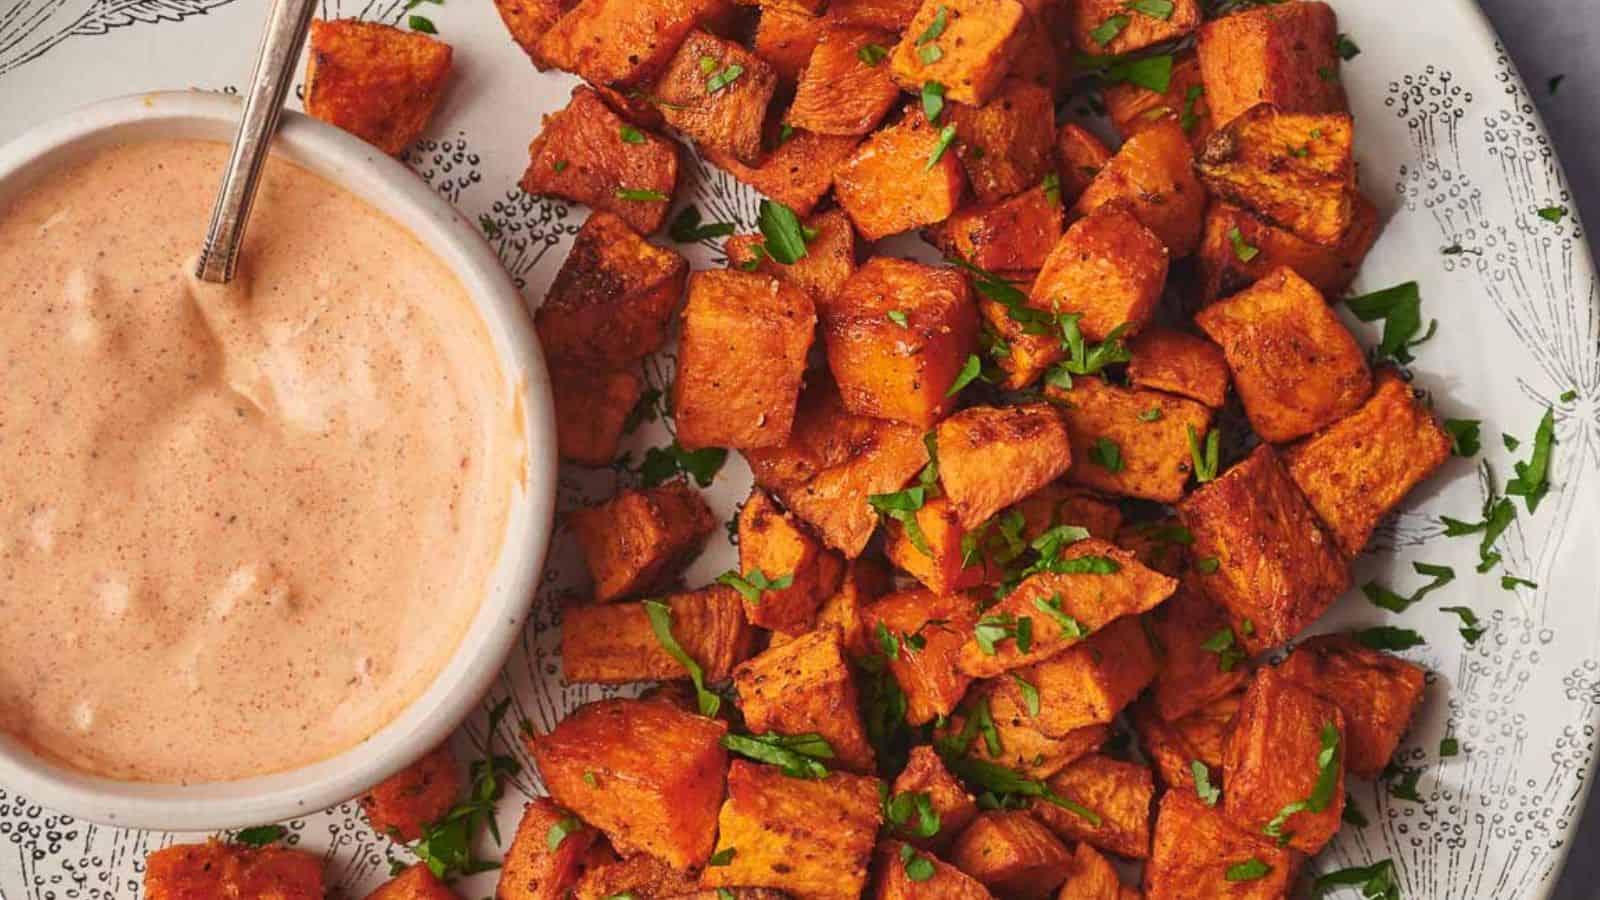 <p>Enjoy a nutritious and straightforward side dish with Sweet Potato Cubes. A versatile recipe that pairs well with various meals.<br><strong>Get the Recipe: </strong><a href="https://www.splashoftaste.com/roasted-sweet-potato-cubes/?utm_source=msn&utm_medium=page&utm_campaign=msn">Sweet Potato Cubes</a></p>